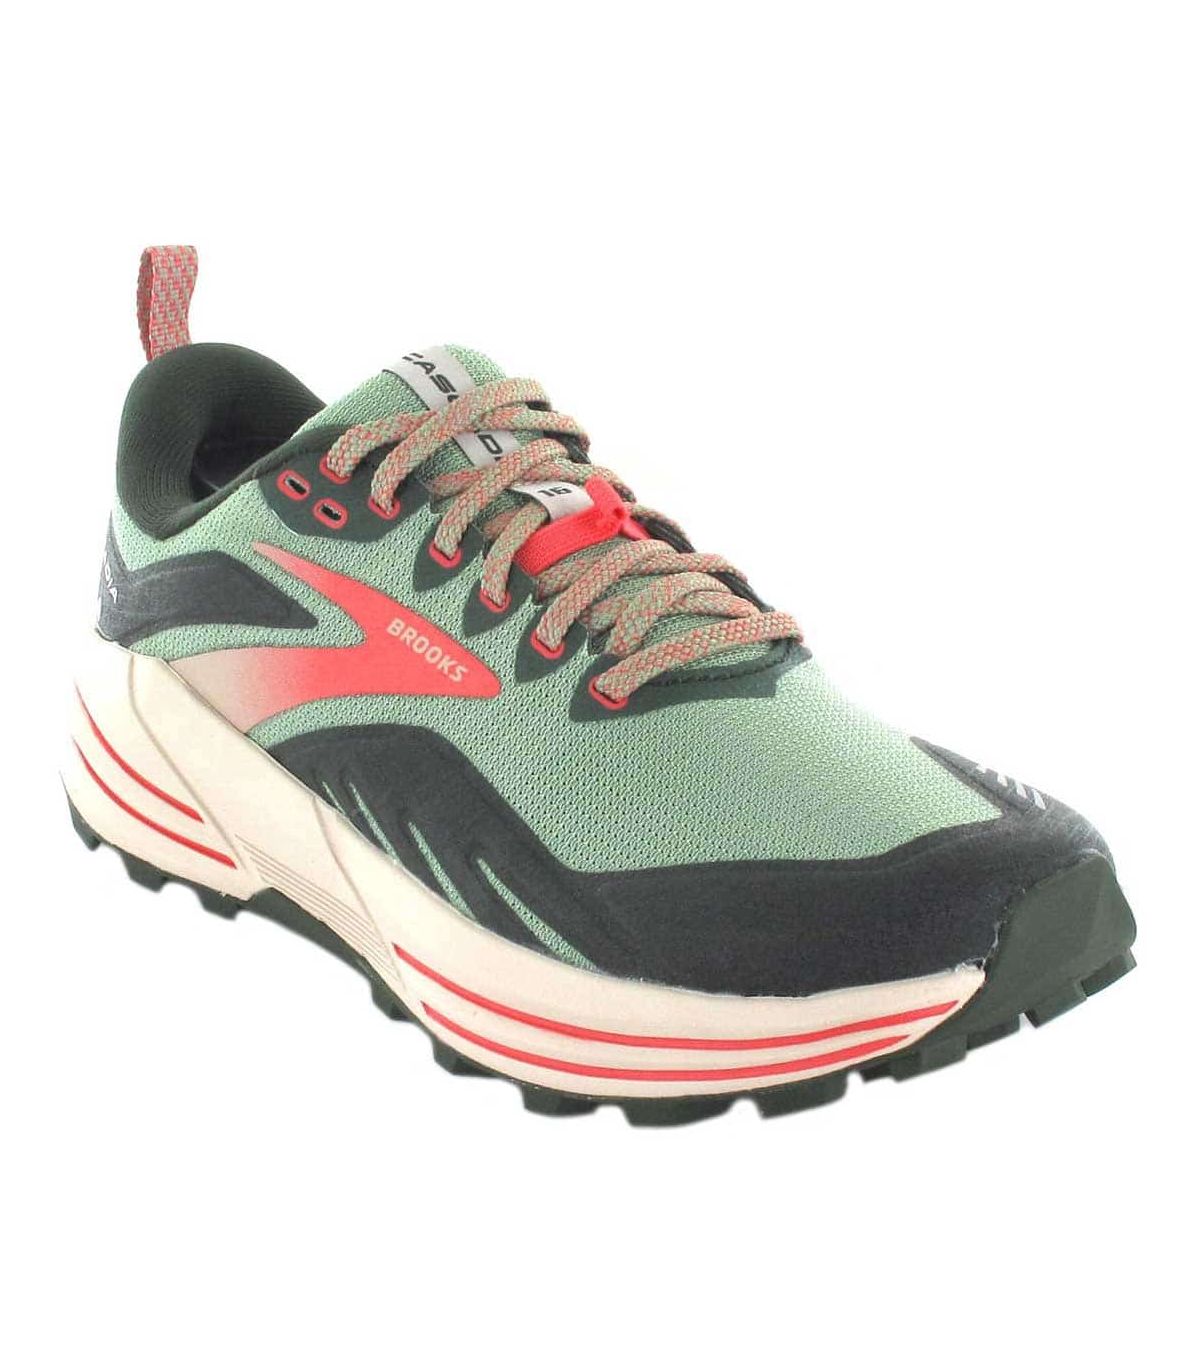 let's do it slit Usually ➤Brooks Cascadia 16 W 394 - Running Shoes Trail